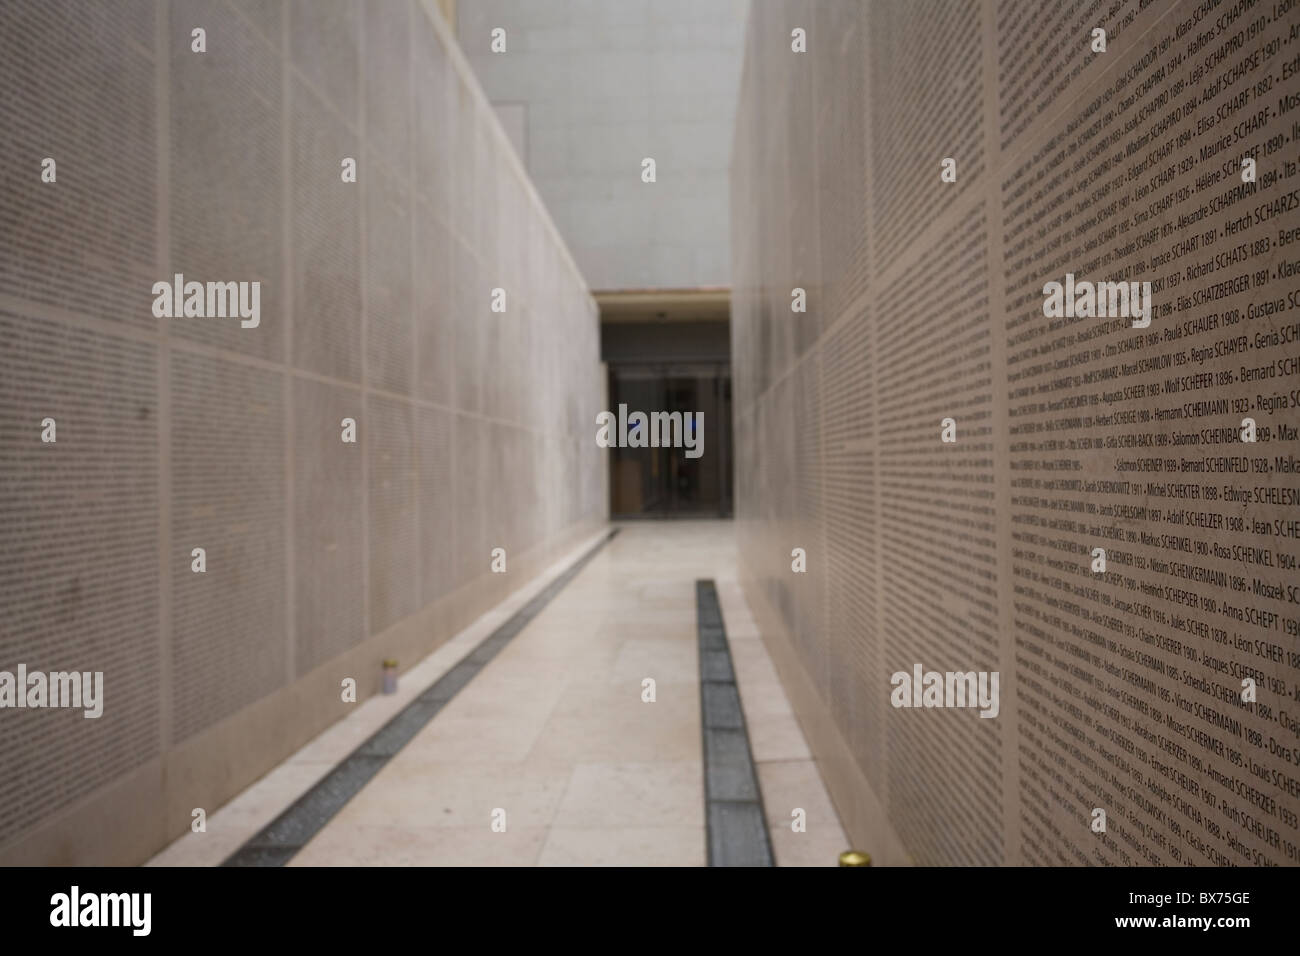 Mur des Noms at the Mémorial de la Shoah bearing the names of Jews deported from France Stock Photo